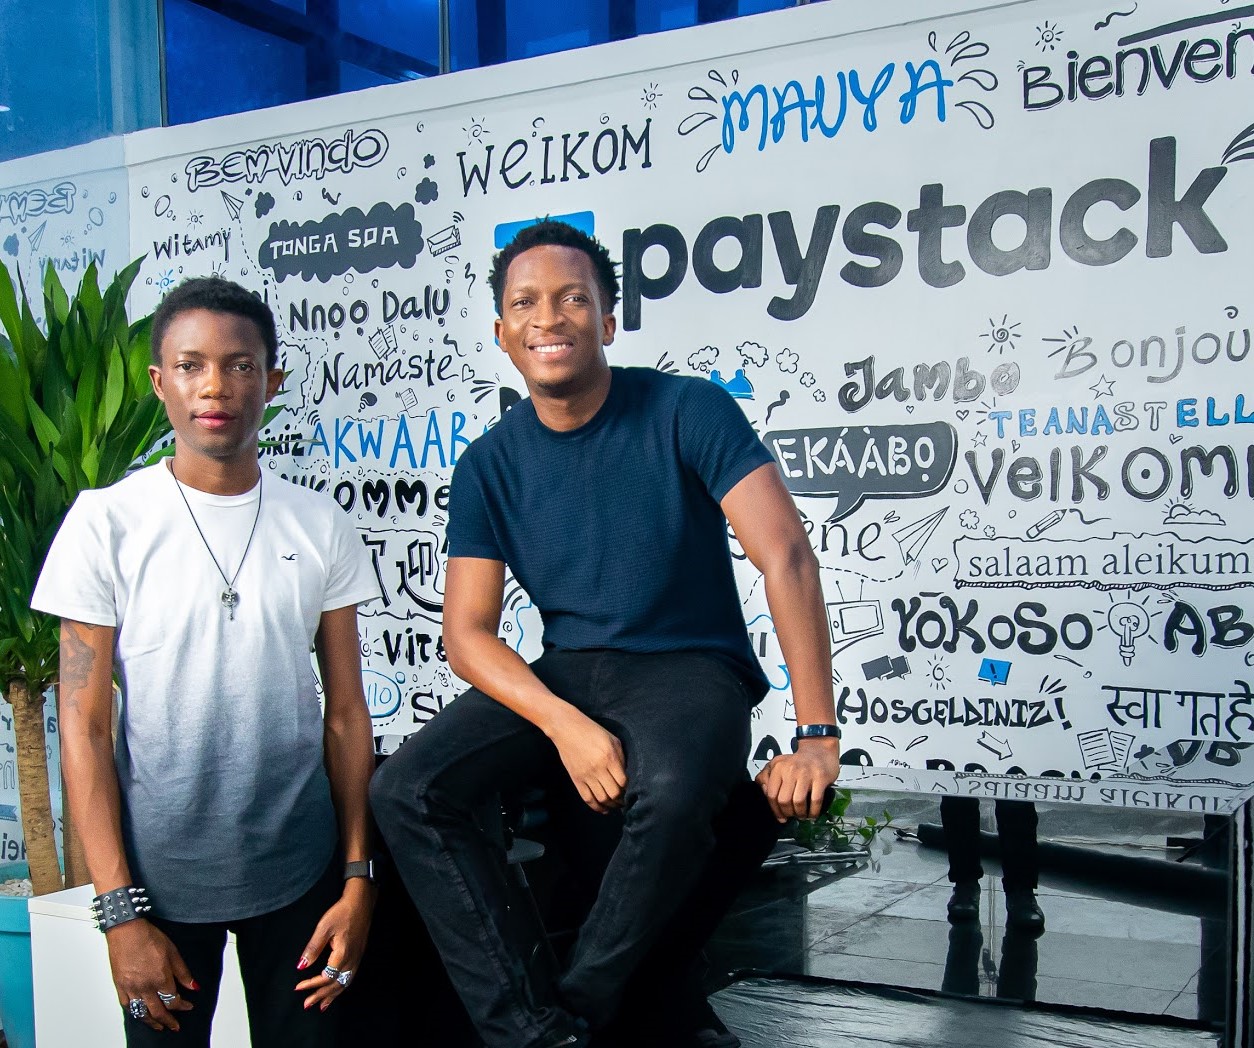 Stripe acquires Paystack to accelerate online commerce across Africa